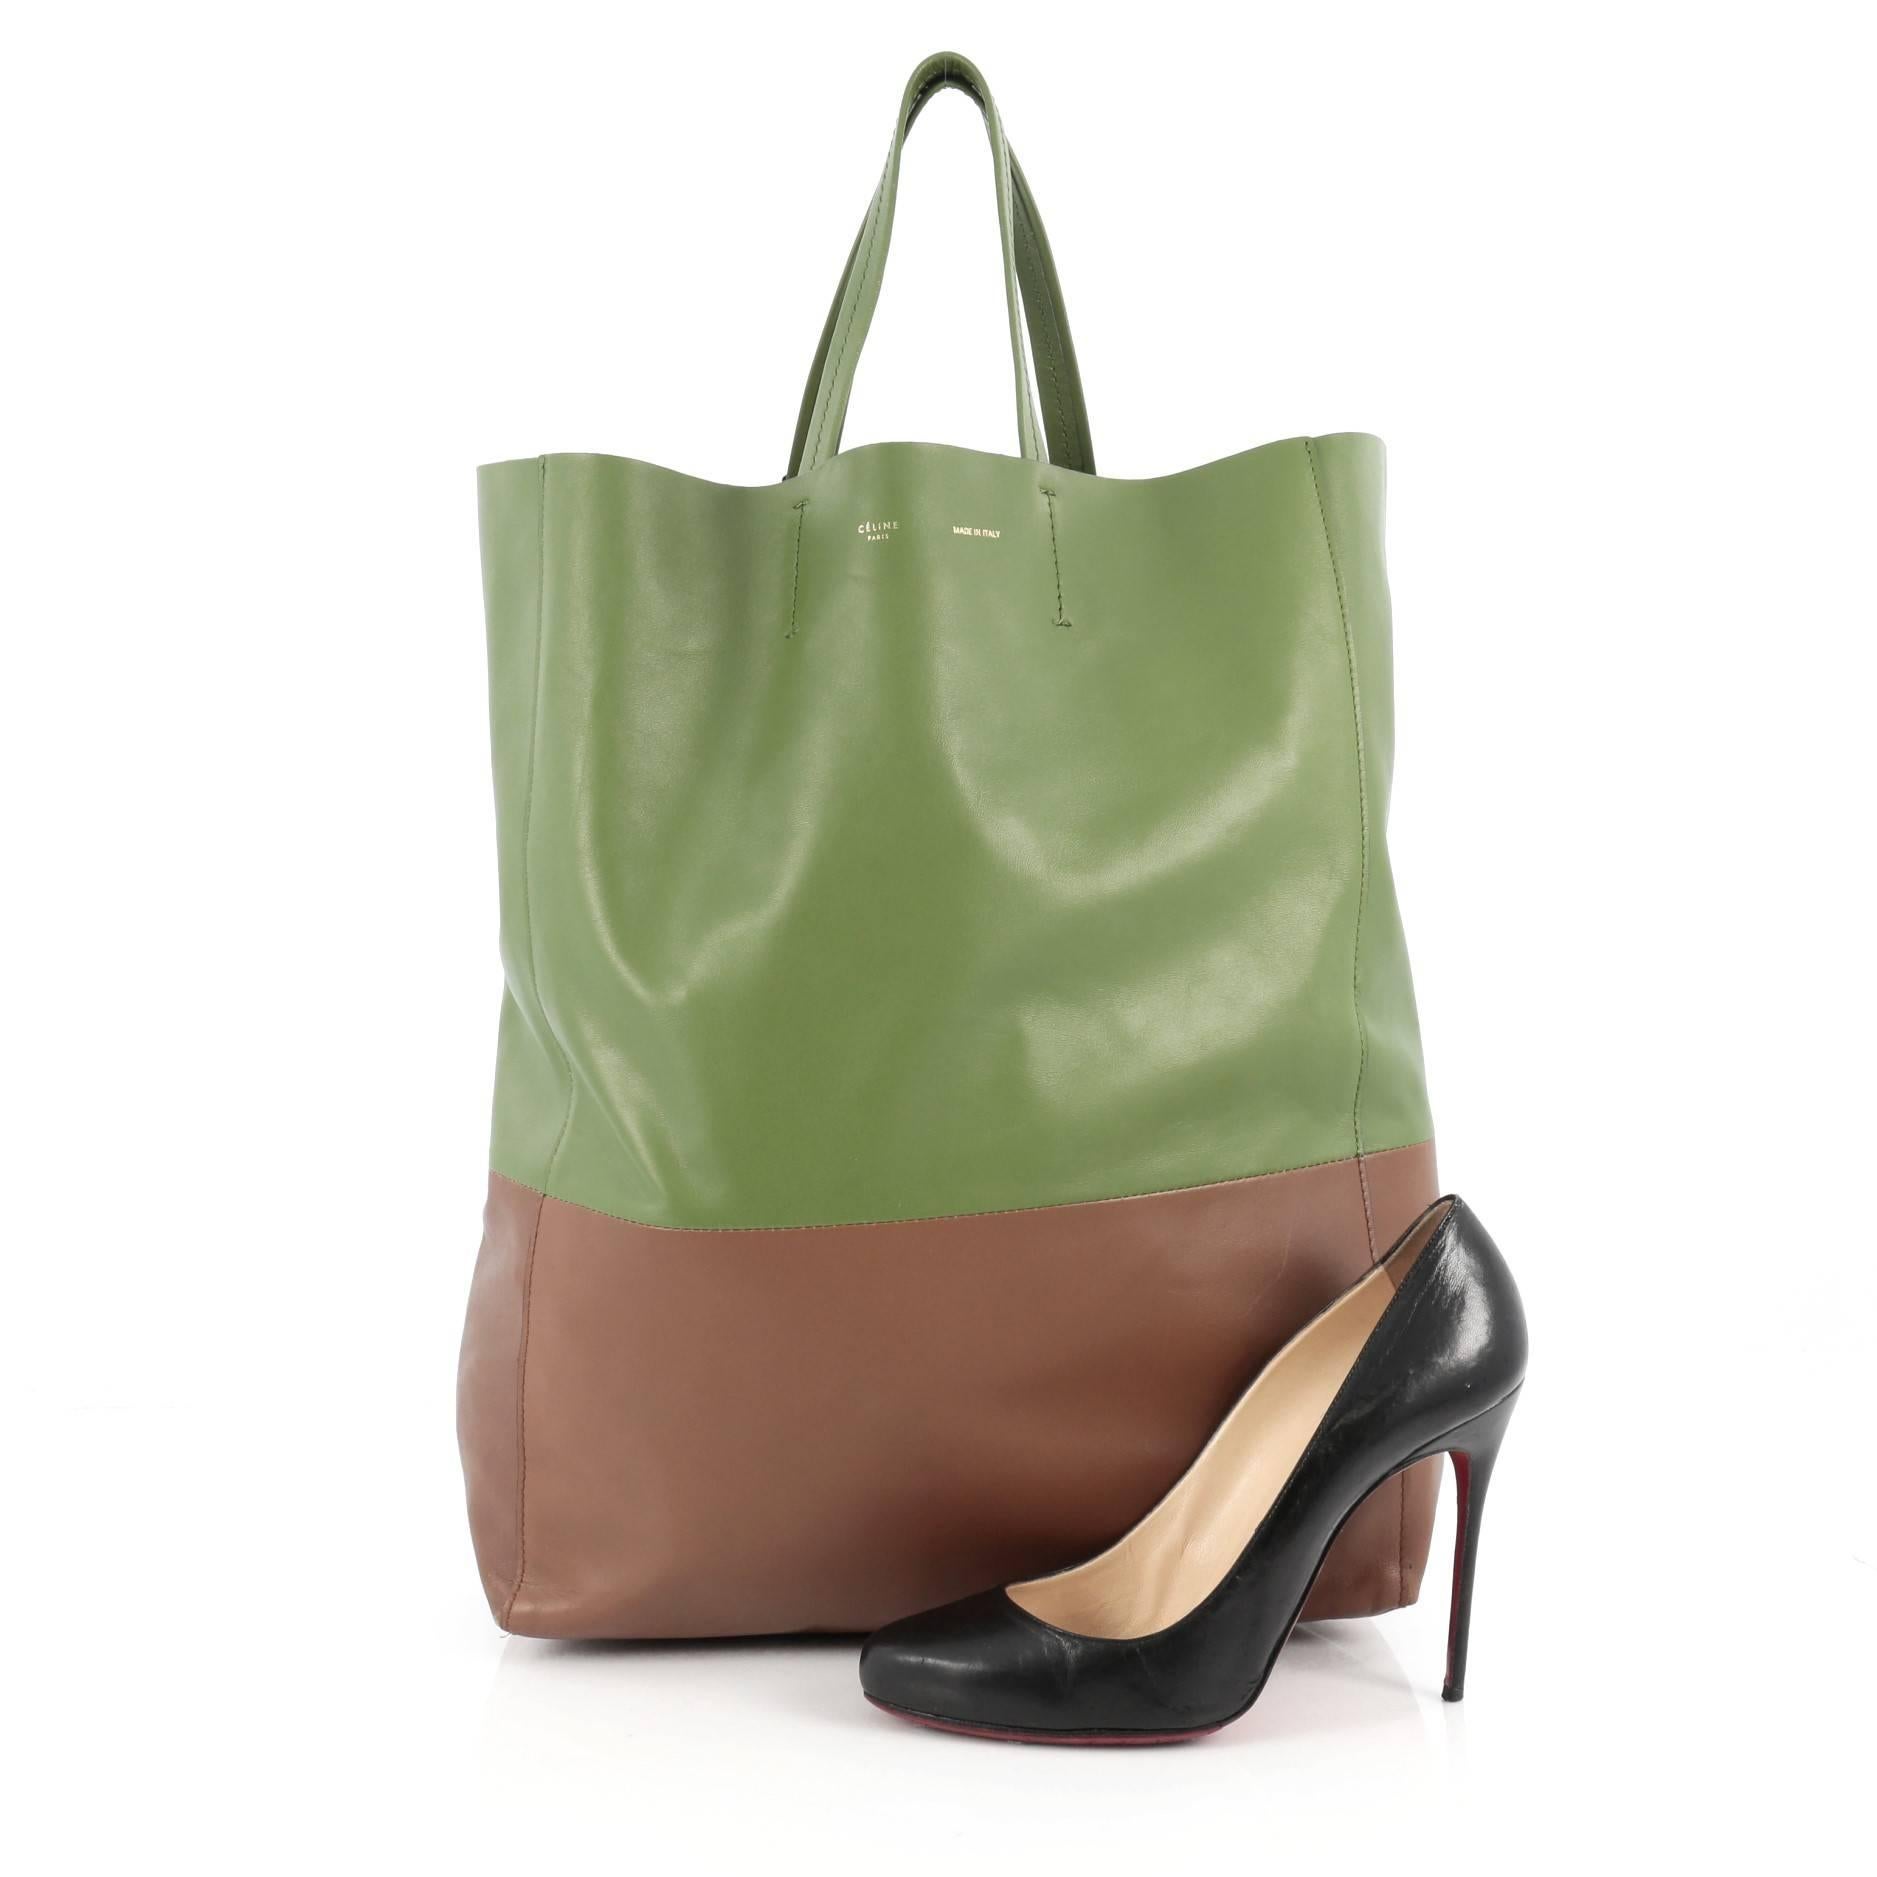 This authentic Celine Vertical Bi-Cabas Tote Leather Large is a perfect everyday accessory for the woman on-the-go. Crafted in minimalistic bi-color green and brown leather, this no-fuss tall tote features slim top handles and gold-tone hardware